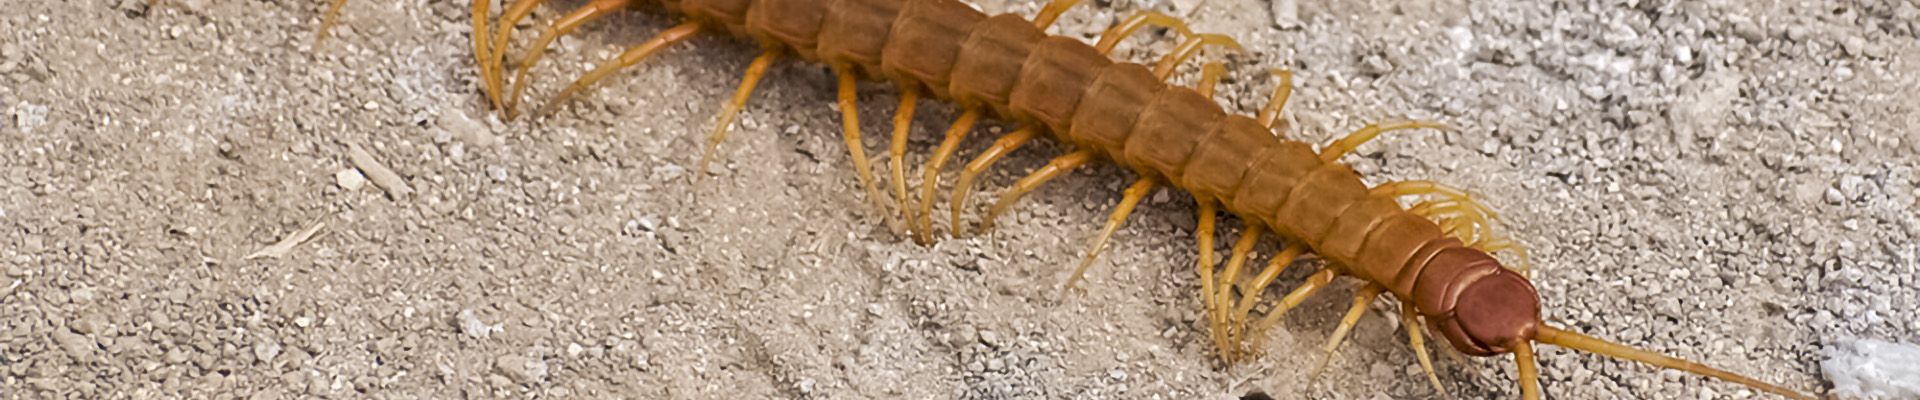 Common Brown Centipede Page Header